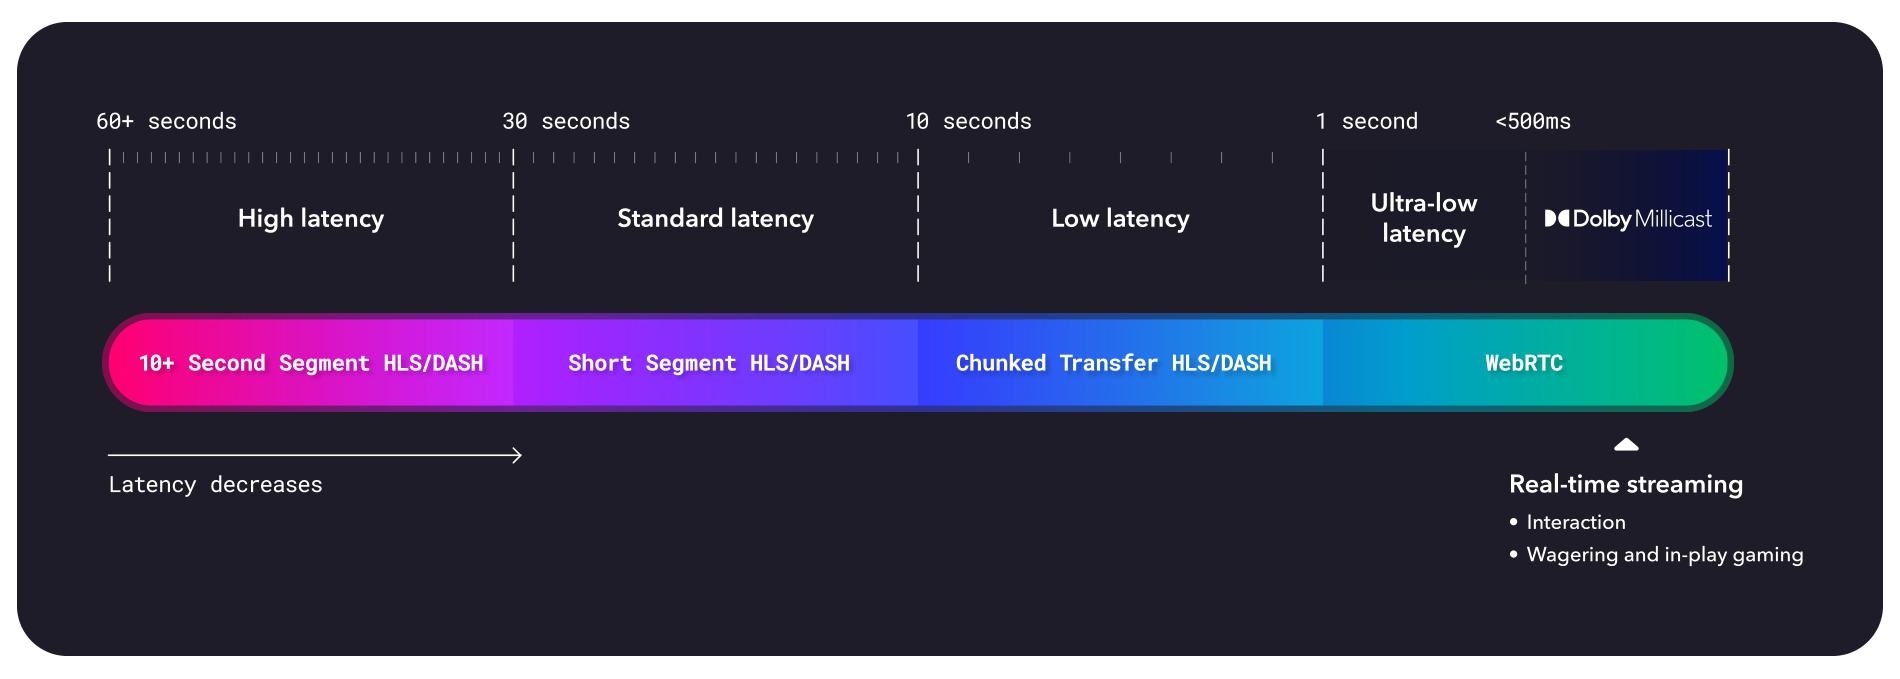 graph showing the broad spectrum of latency types from high latency on the left with 60+ seconds, to standard latency at 30 seconds and low latency starting at 10-1 seconds. Ultra low latency is less than one second and Dolby Millicast offers 500ms or less latency with real-time streaming